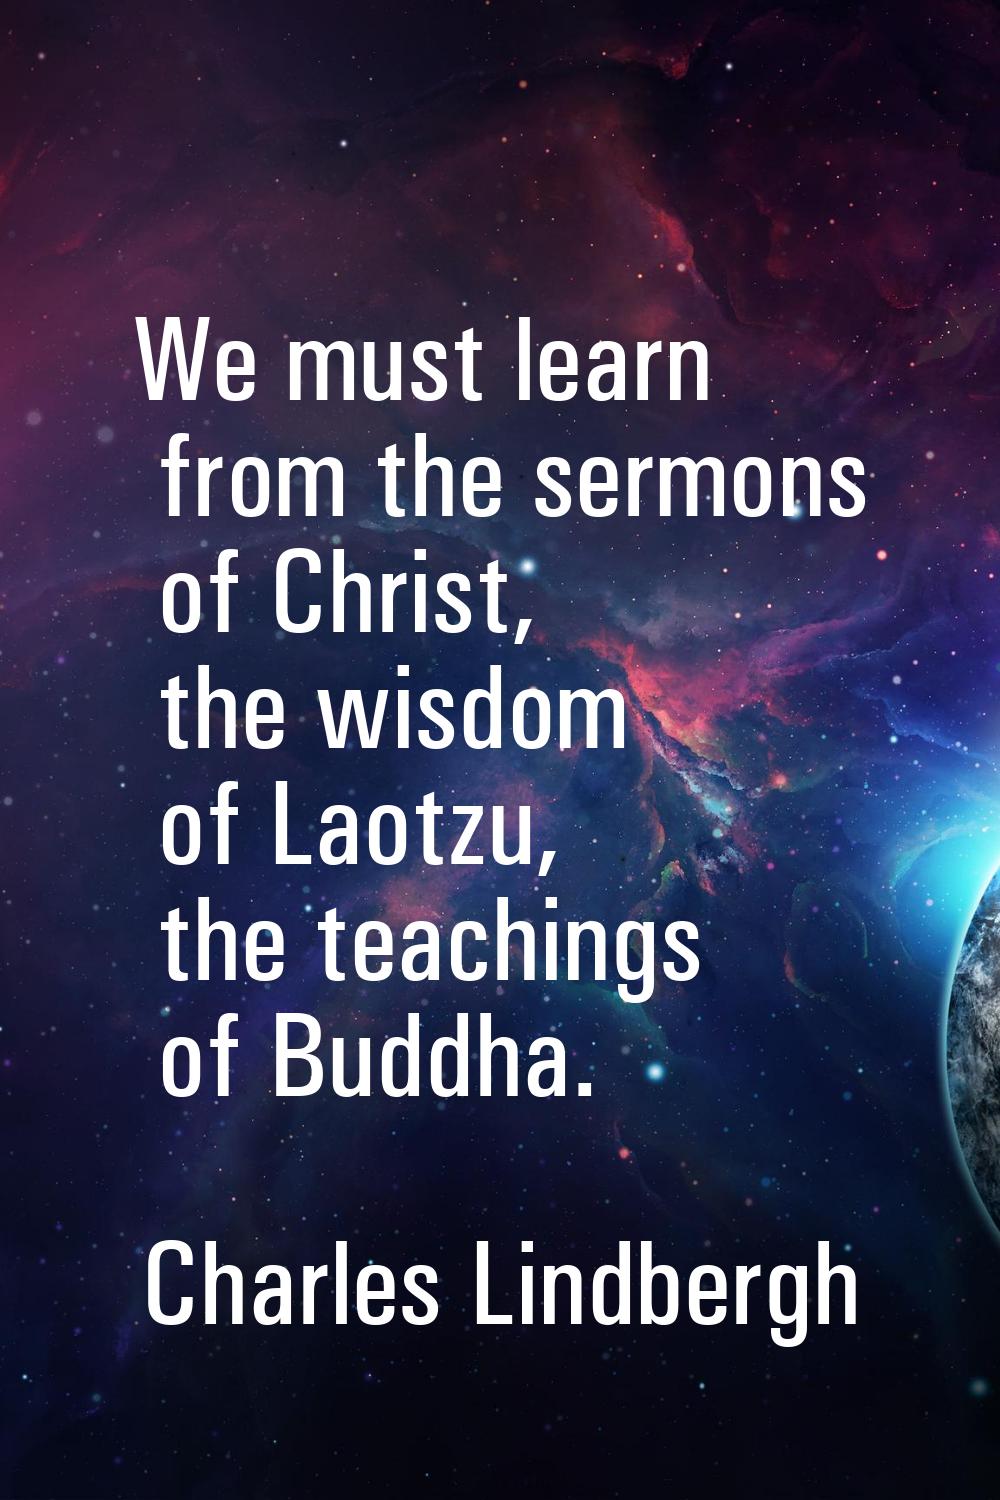 We must learn from the sermons of Christ, the wisdom of Laotzu, the teachings of Buddha.